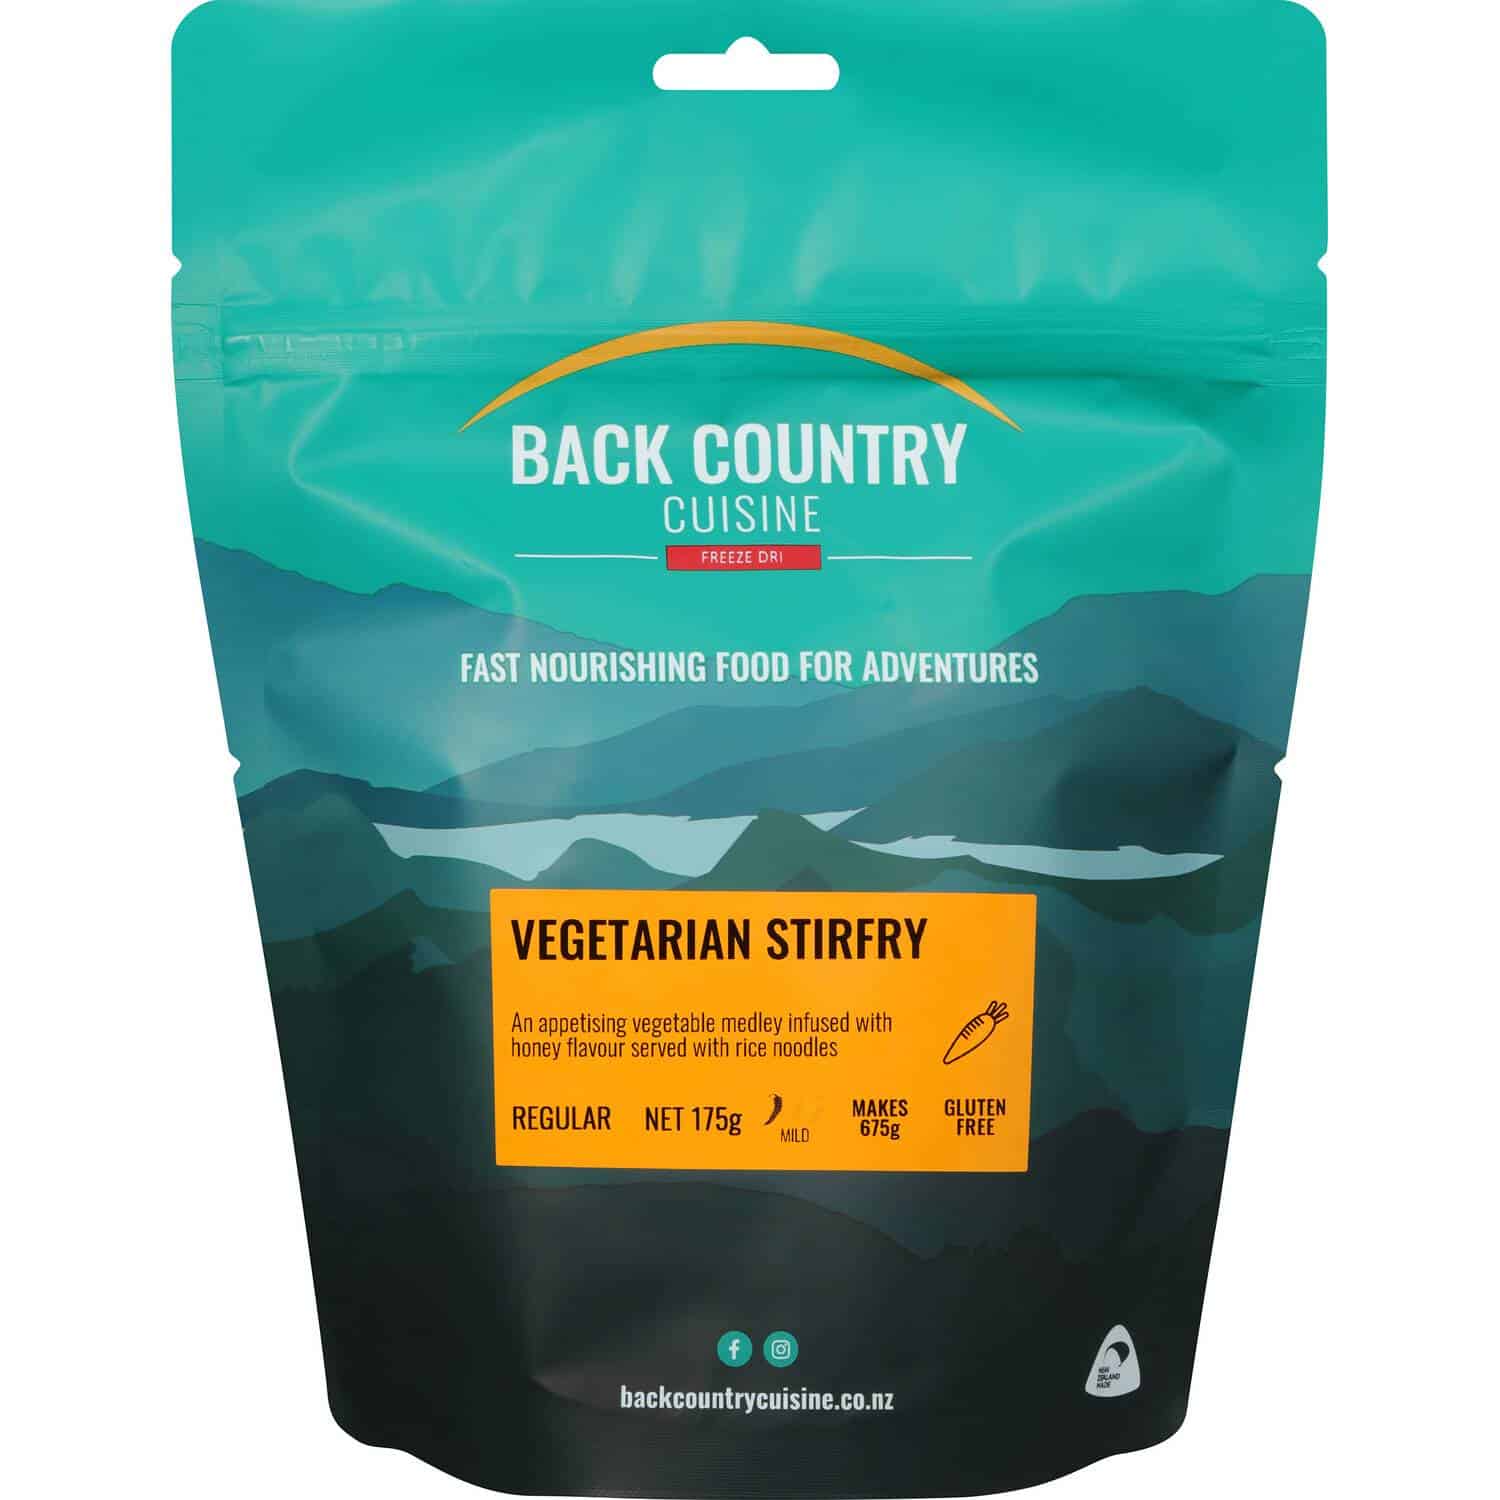 Back Country Cuisine Vegetarian Stirfry Regular - Tramping Food and Accessories sold by Venture Outdoors NZ